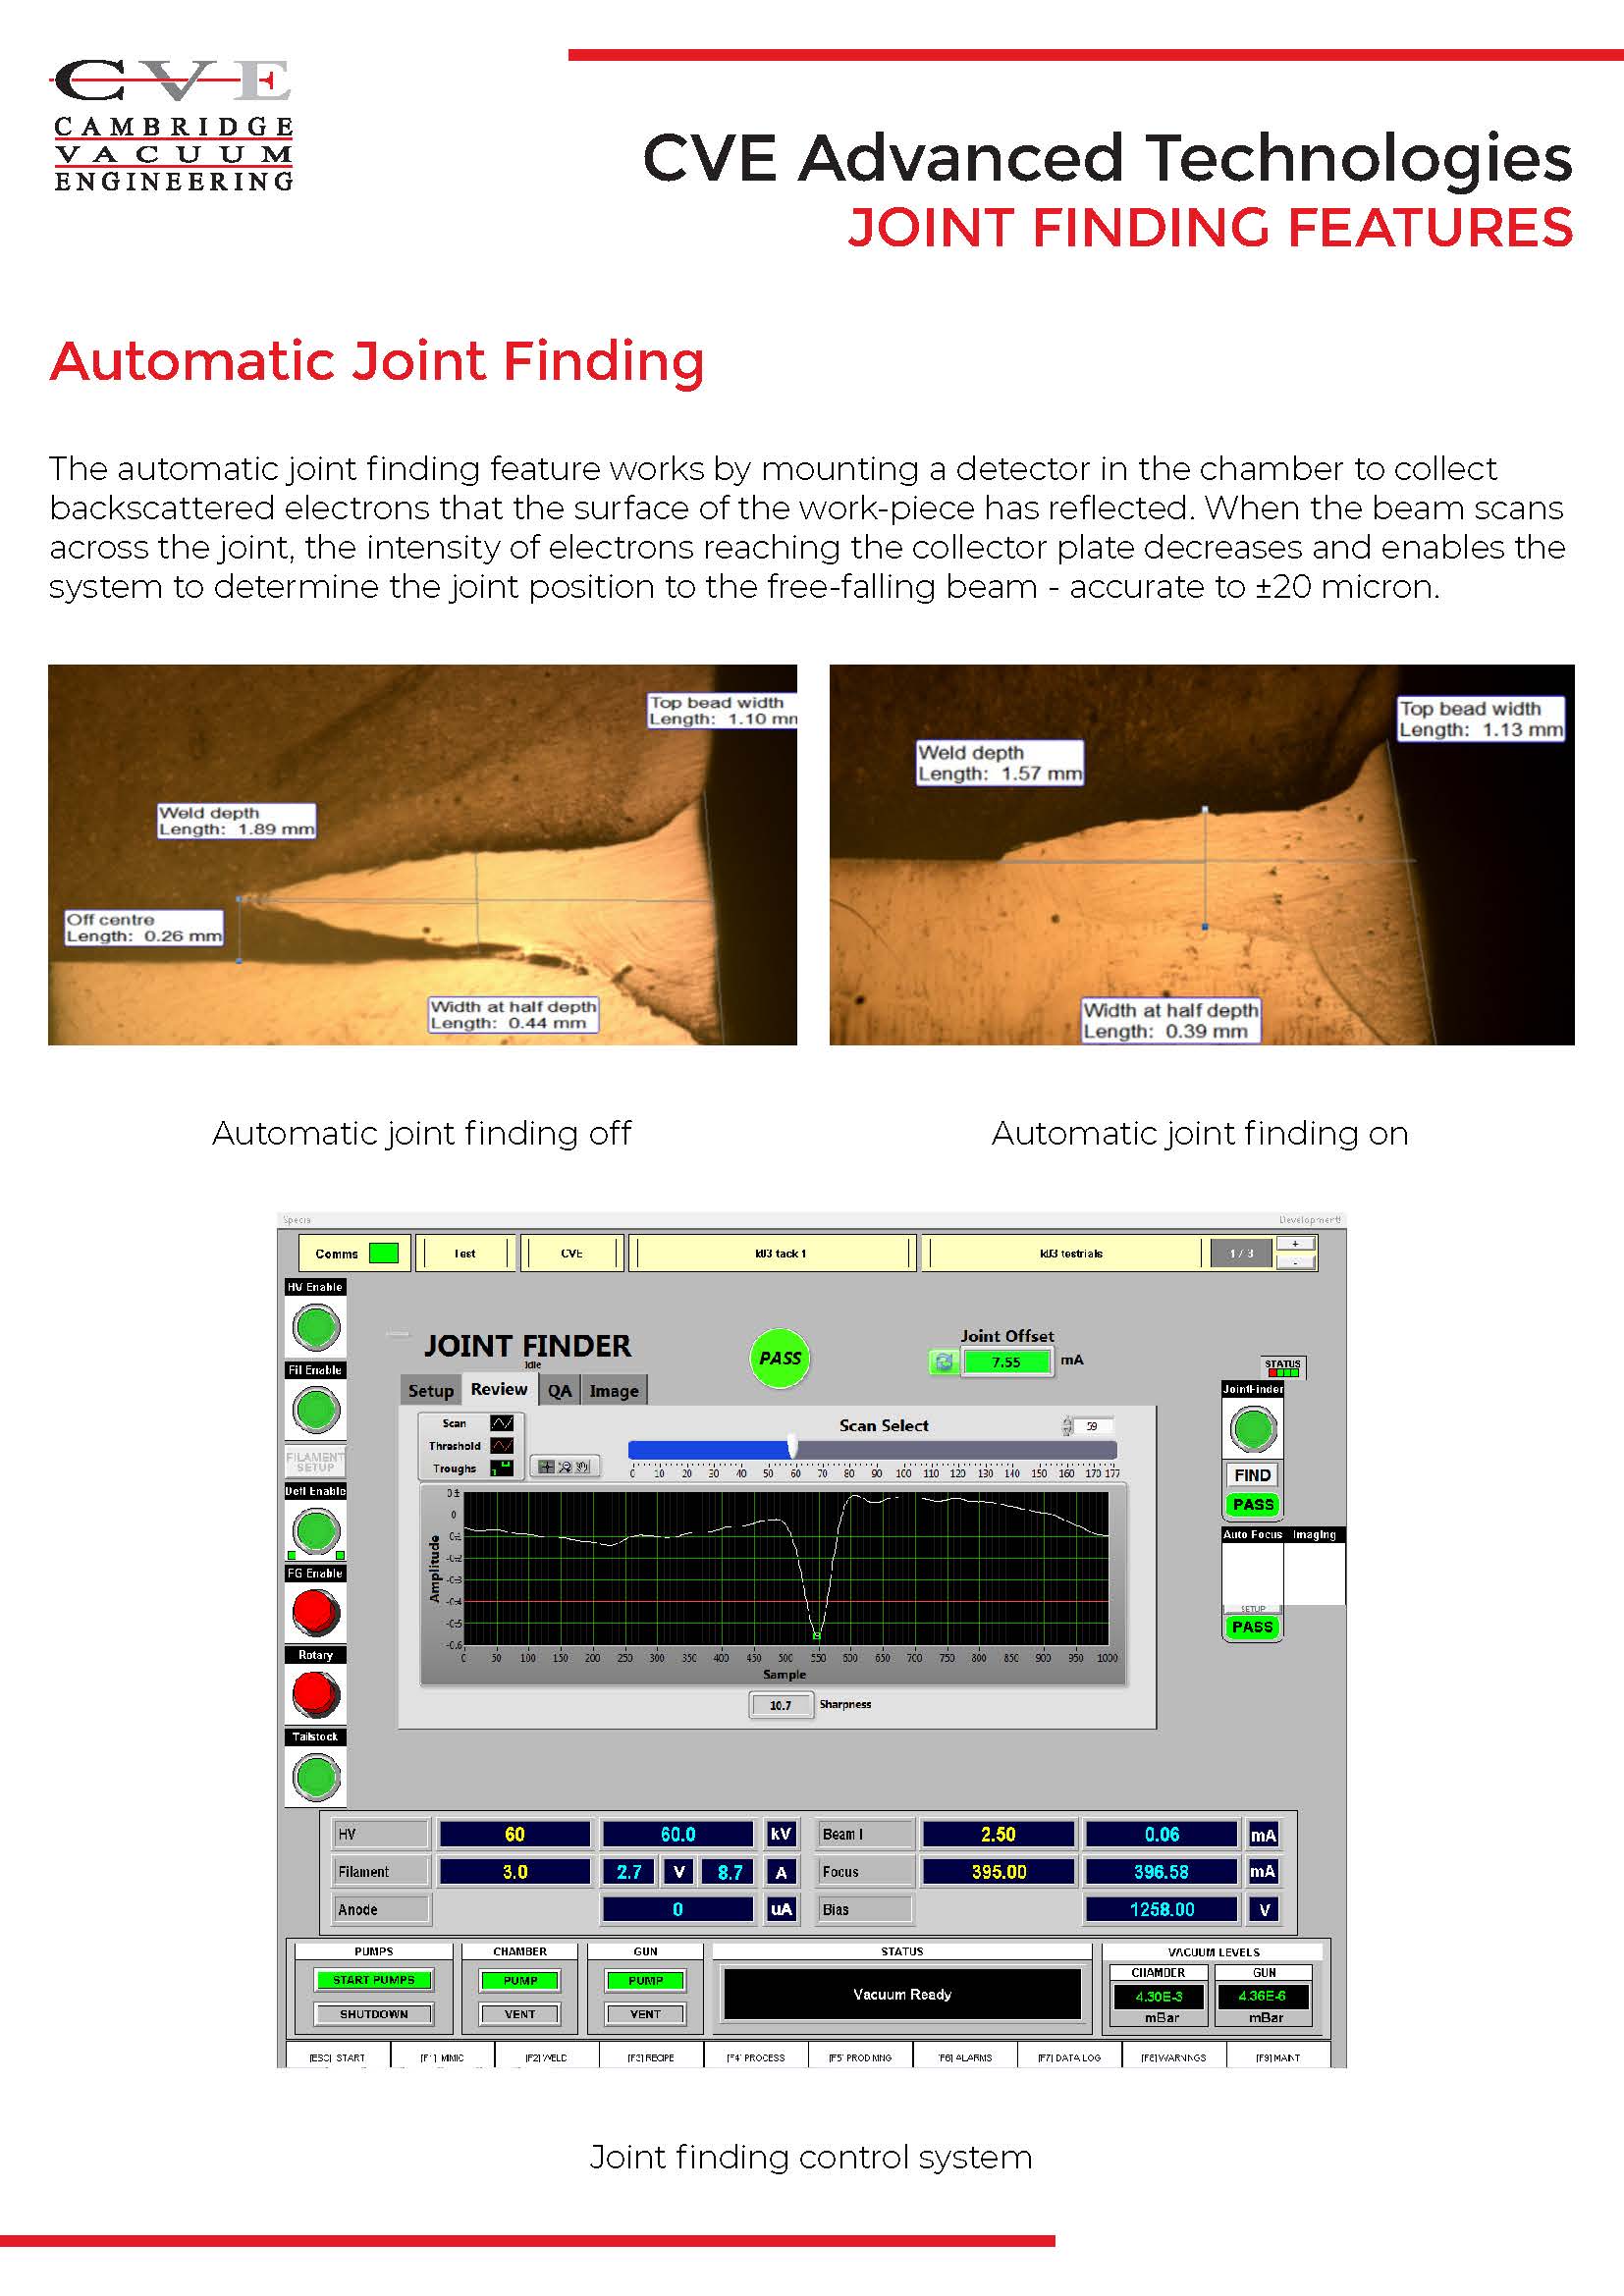 Joint Finding Features